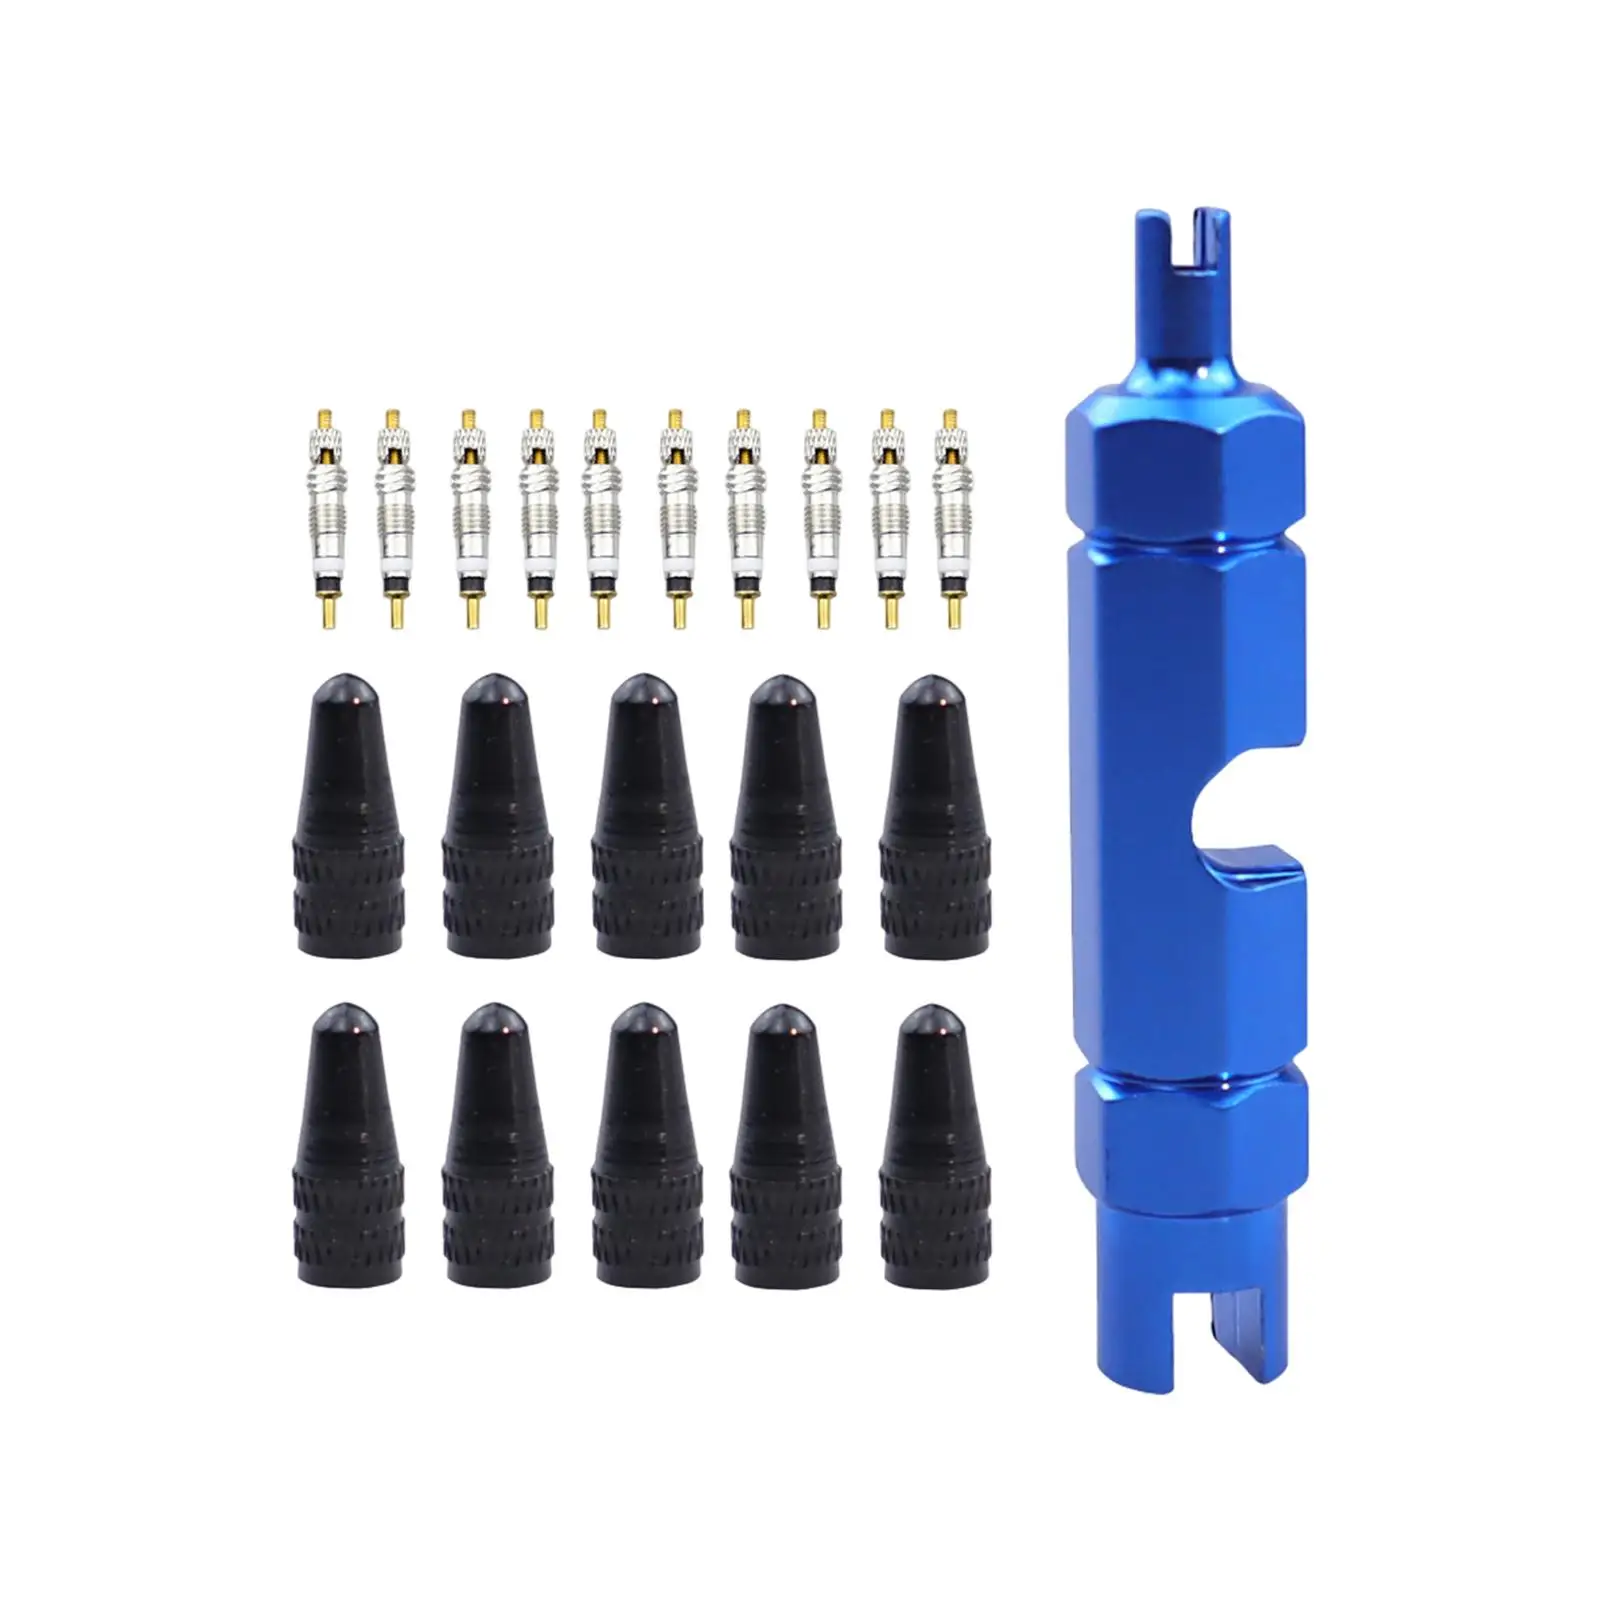 Tire Valve Stem Removal Tool Kit Single Head Valve Core Remover Motorcycle Truck Spare Parts Good Performance Valve Cores